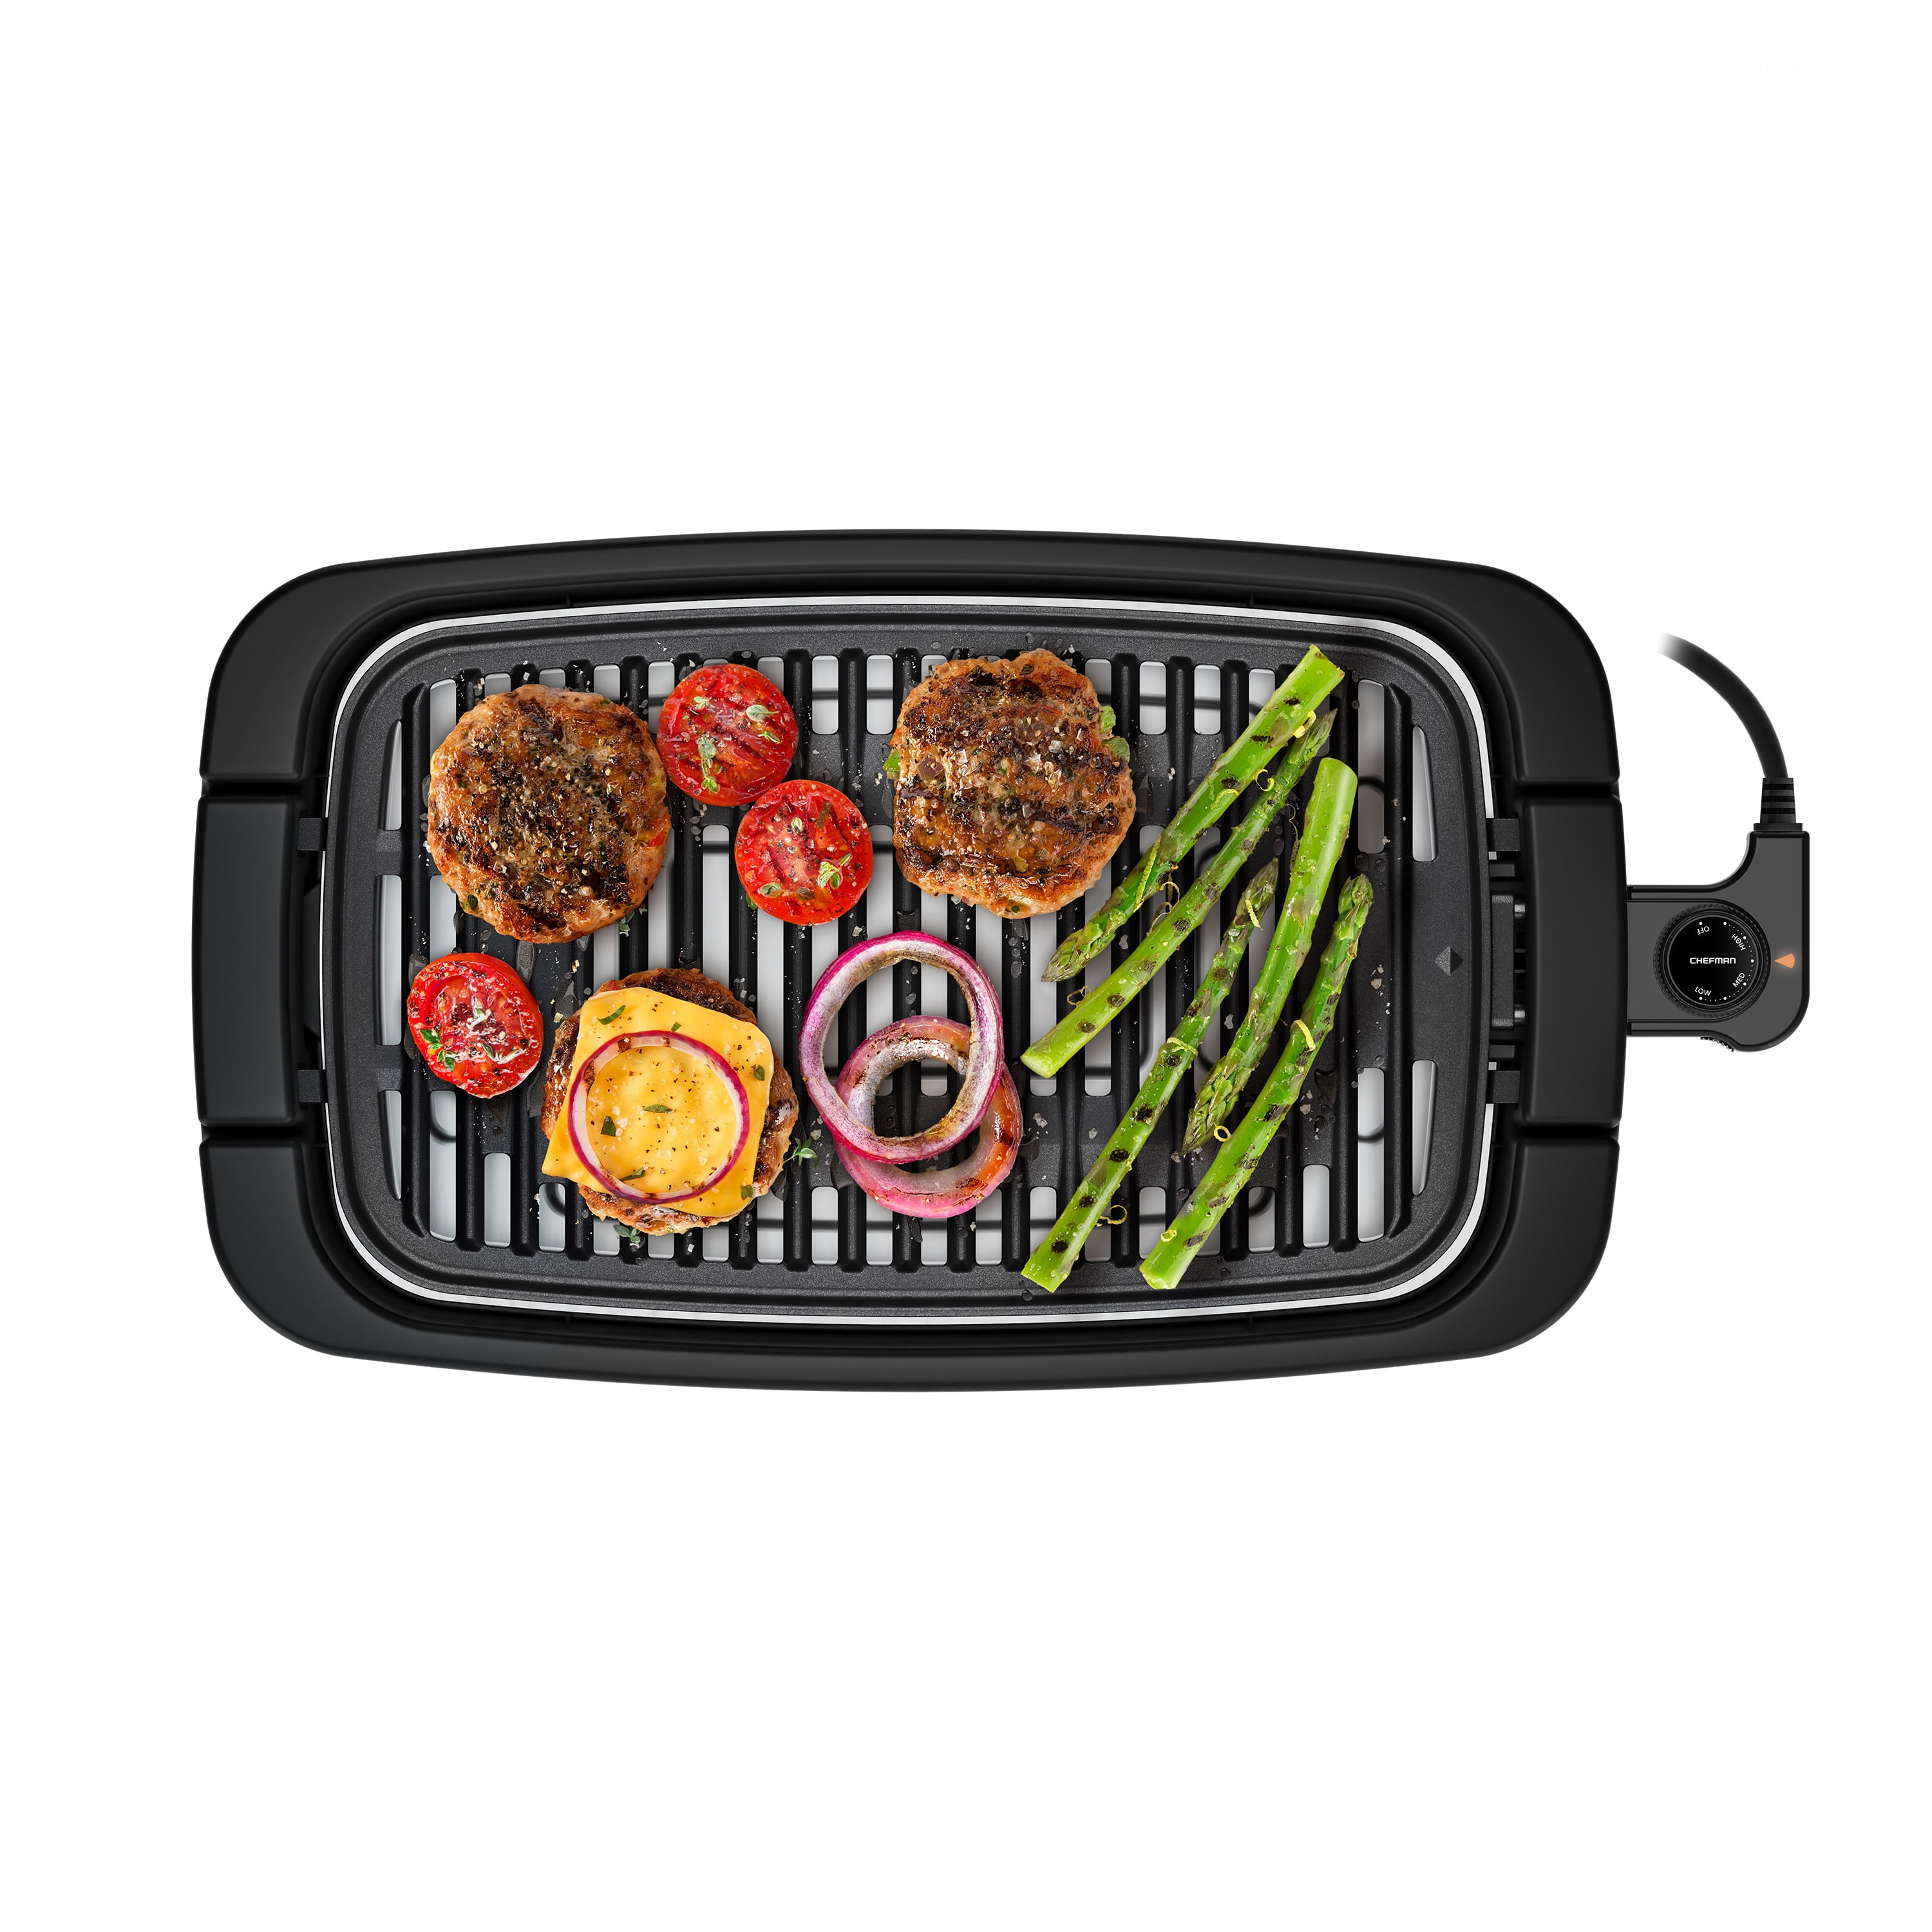 Chefman on Instagram: Experience the thrill of grilling in the great  indoors with the #Chefman Smokeless Electric #IndoorGrill. Get yours from  #Walmart today to enjoy the taste of grilled food year-round! 🤩